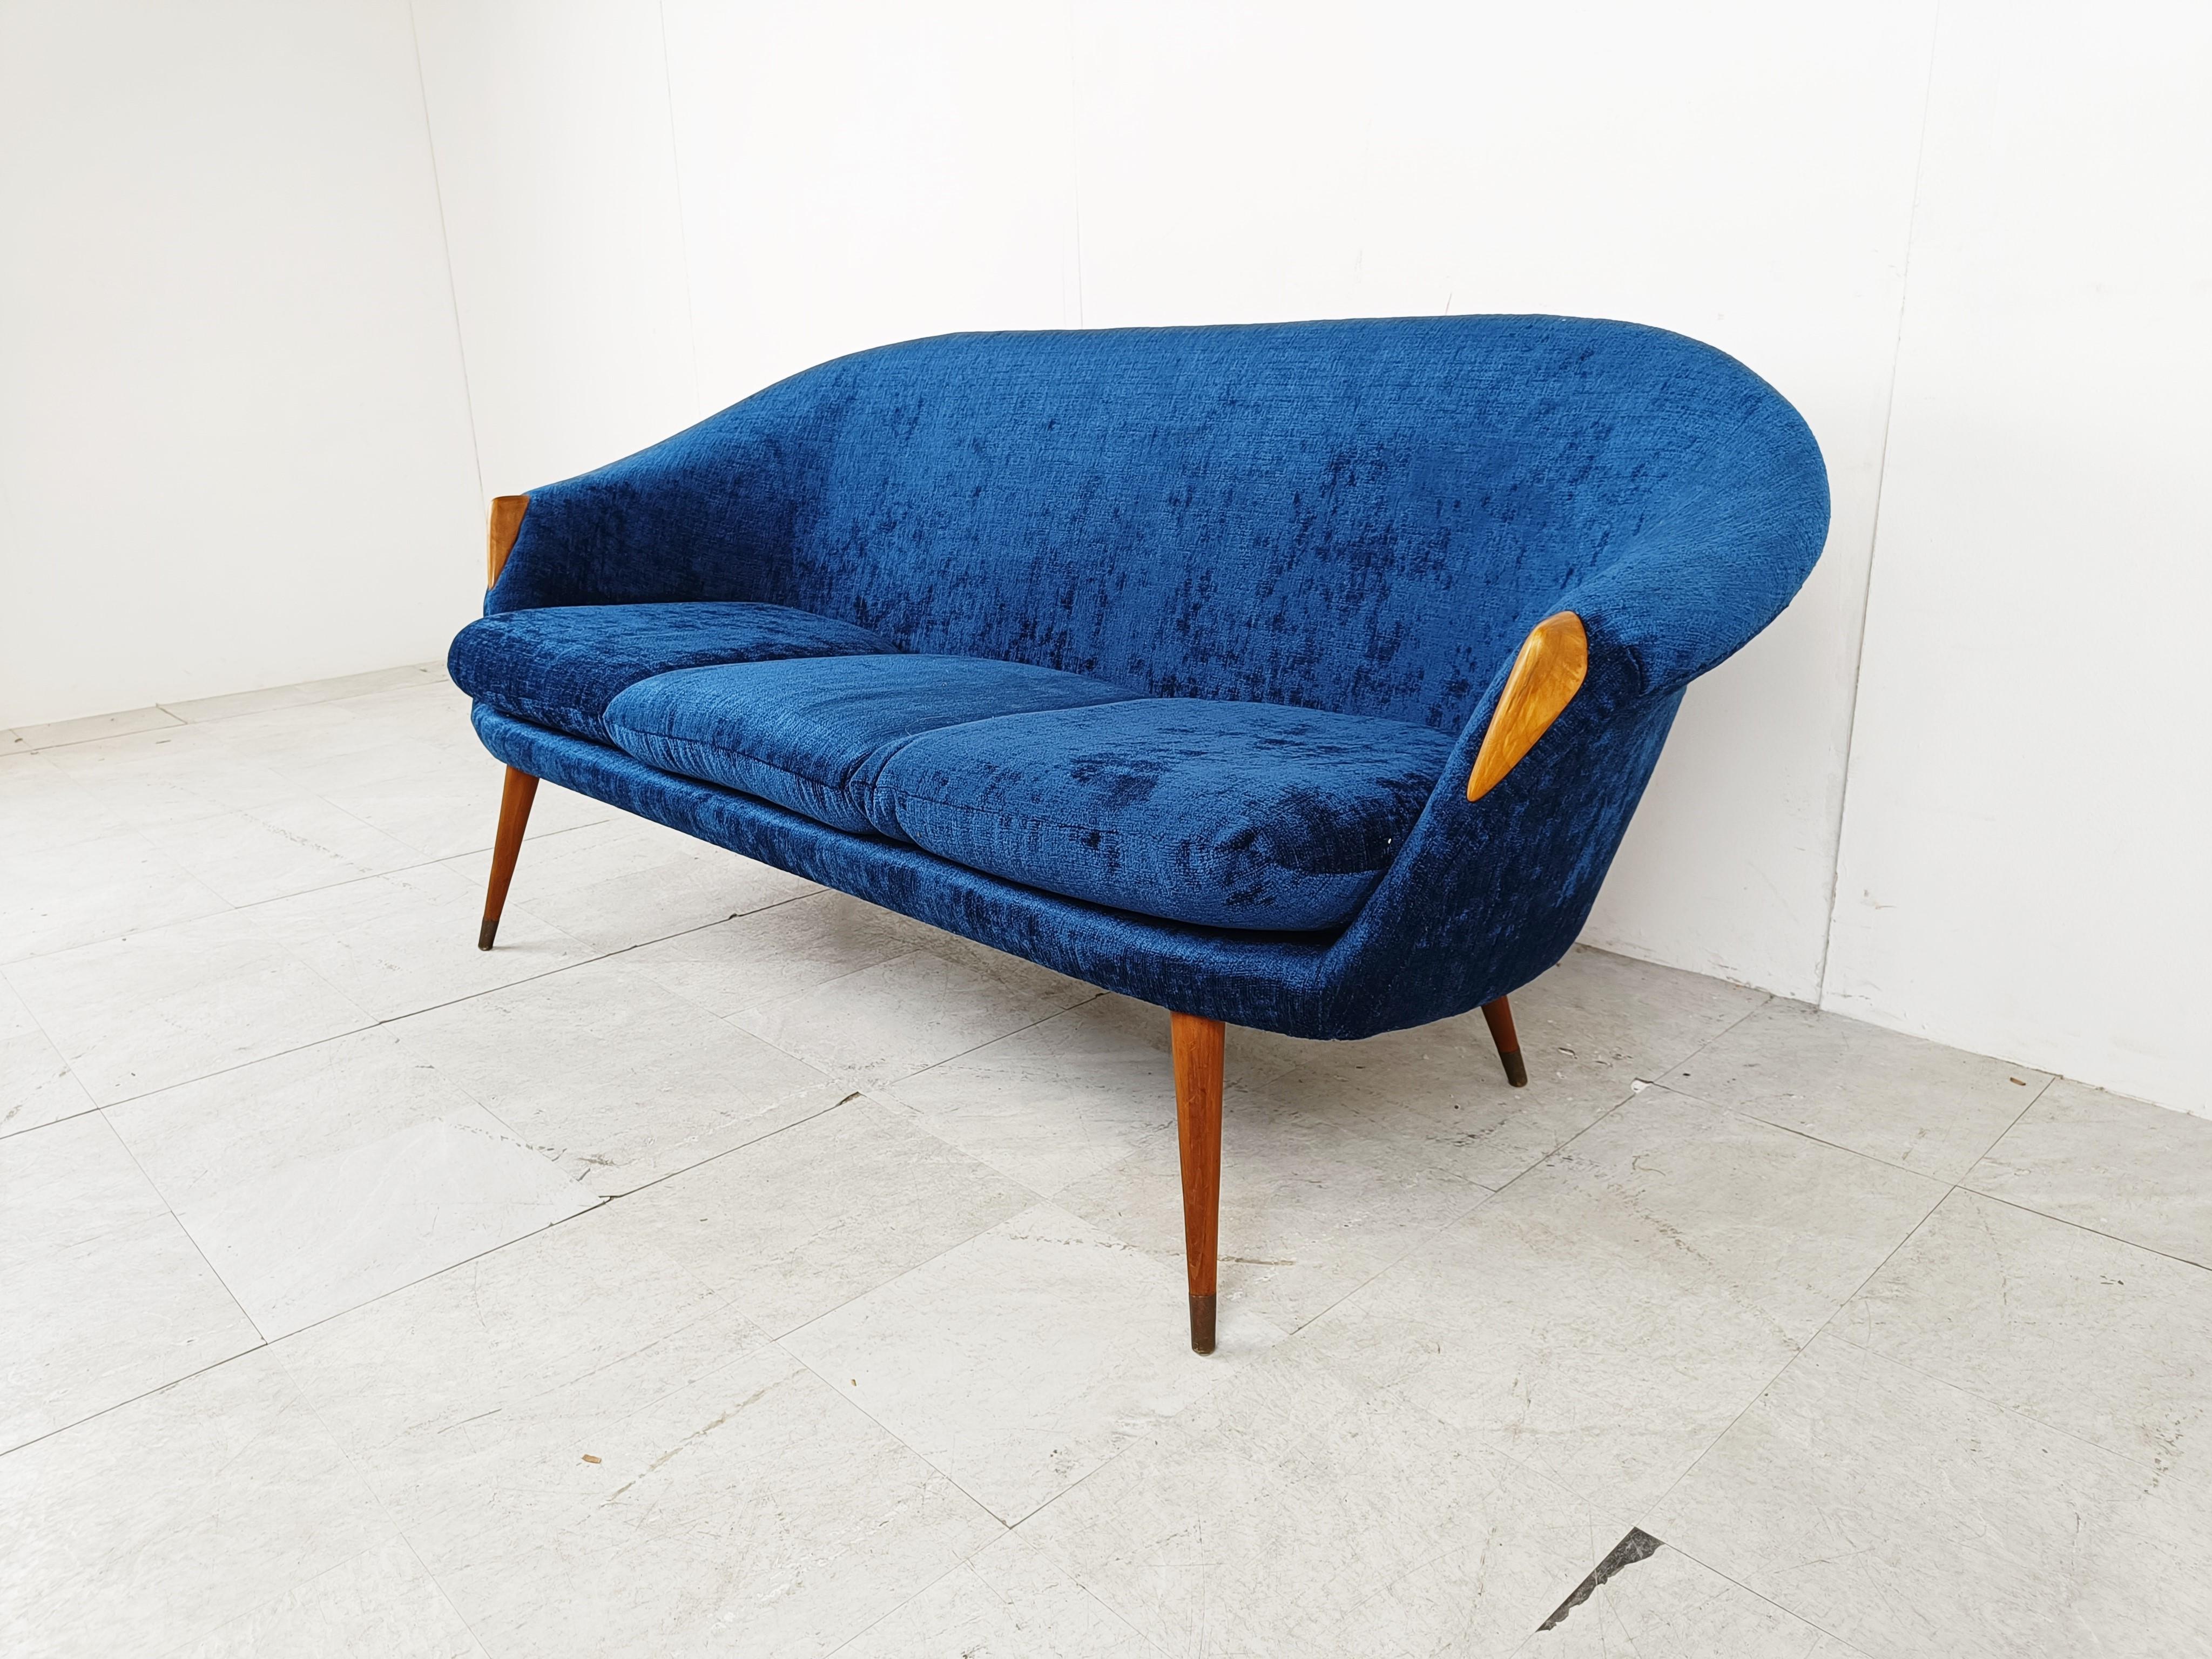 Danish Midcentury Sofa Attributed to Nanna Ditzel, 1950s For Sale